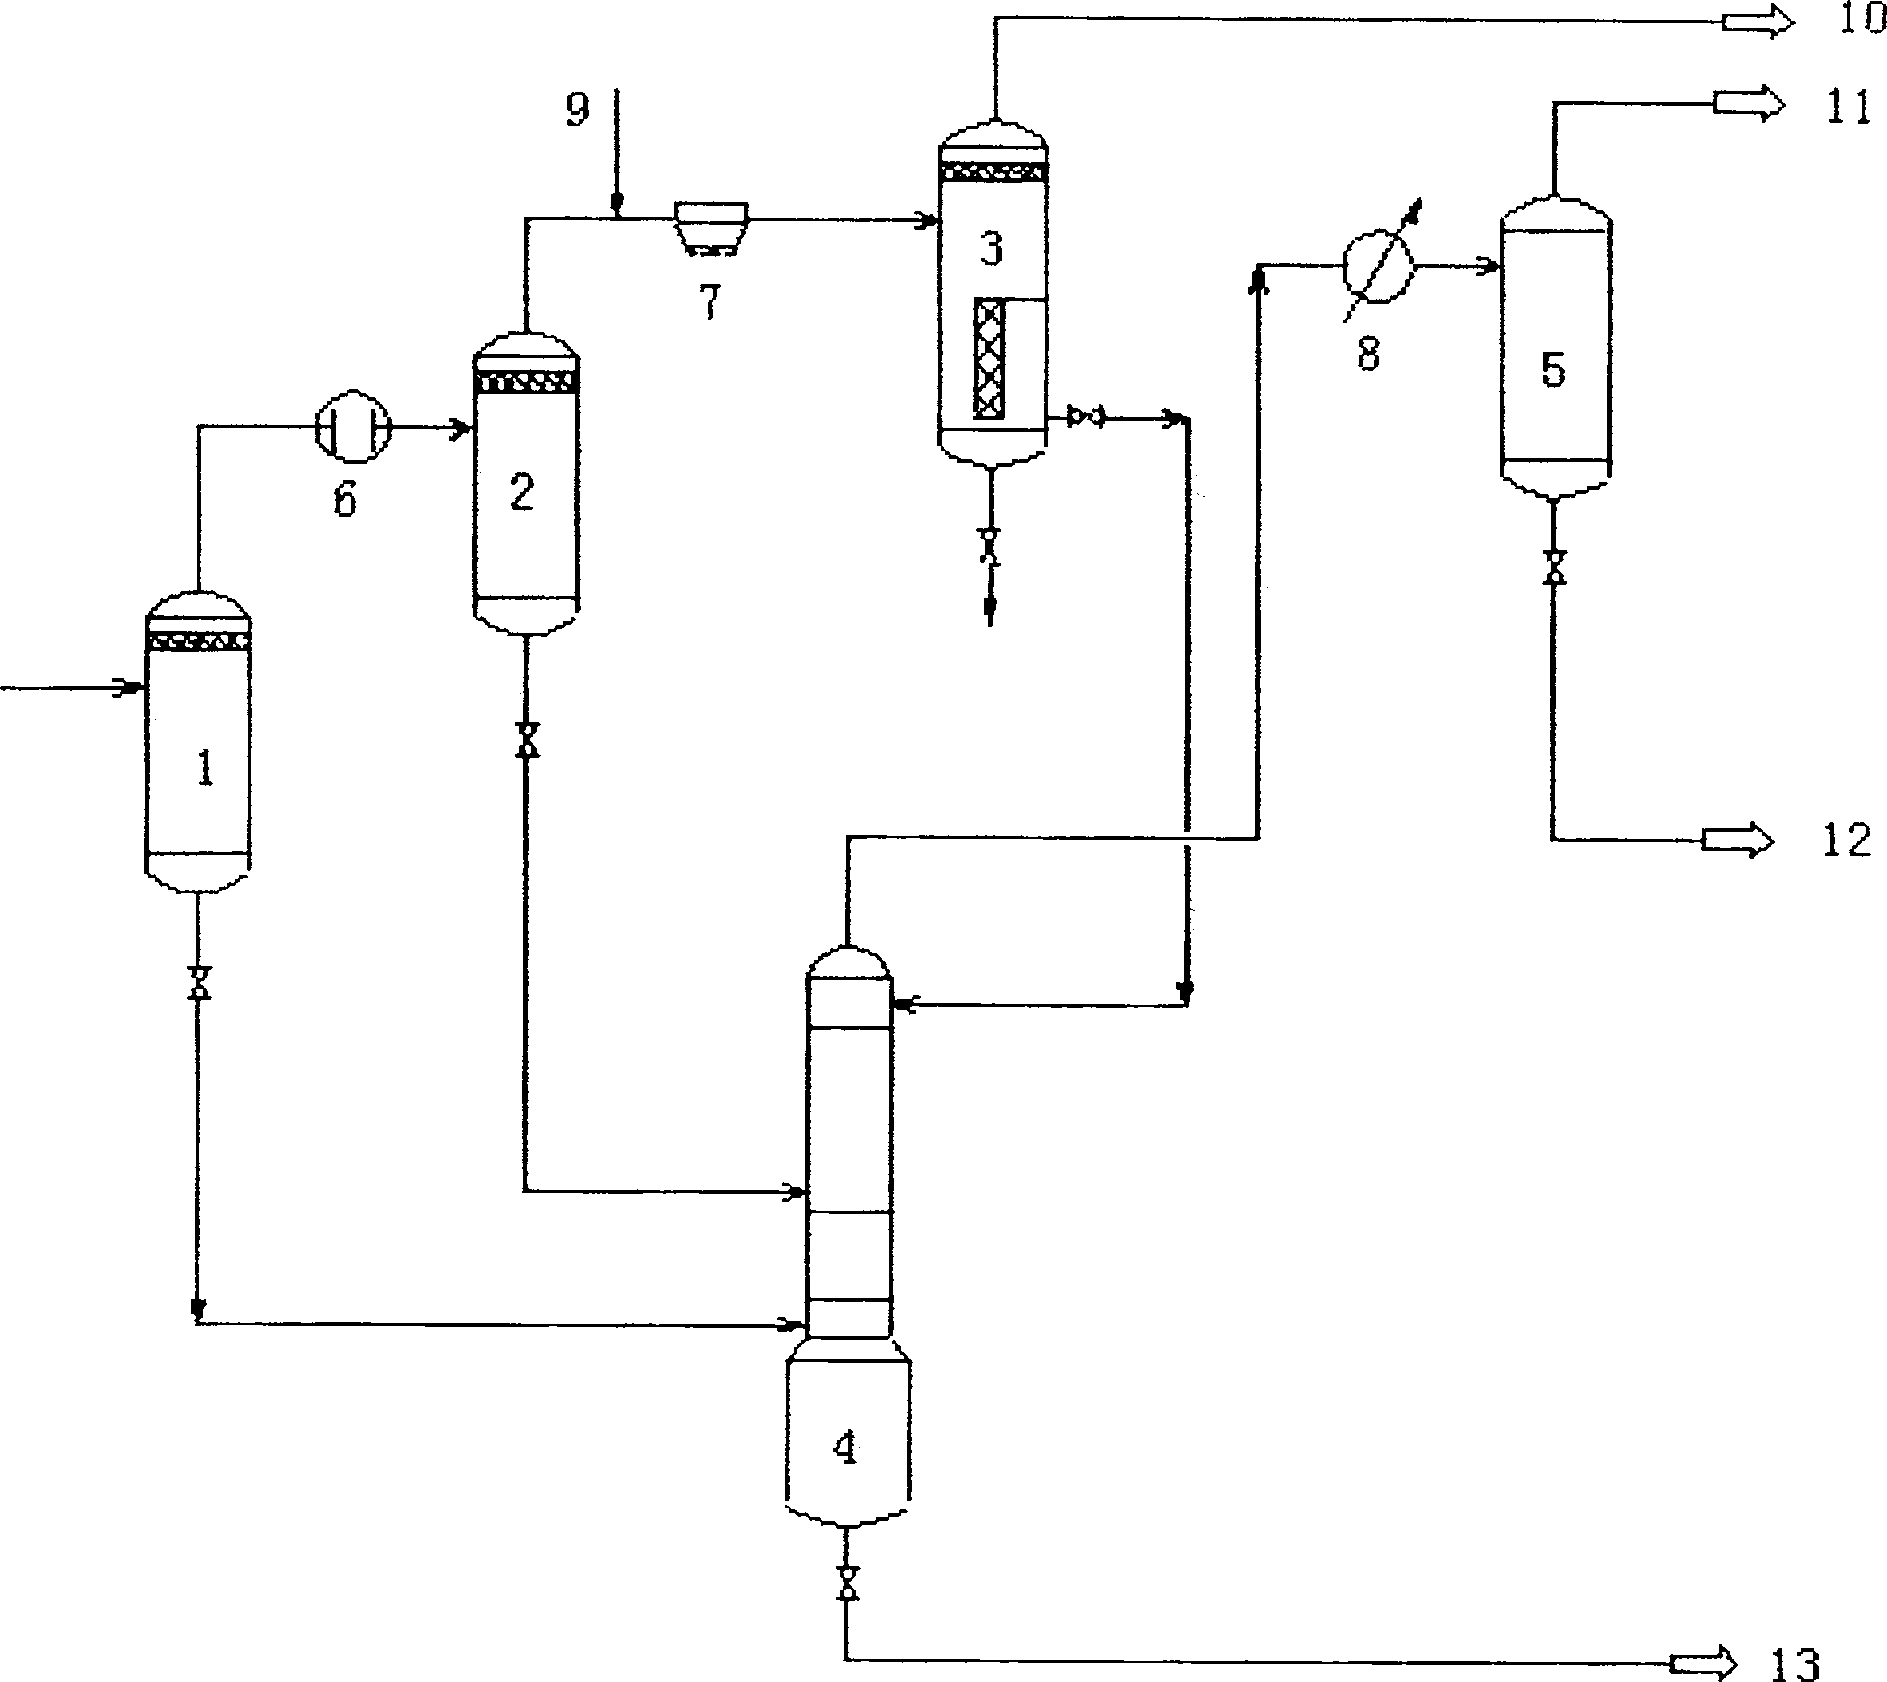 Flow for separating outflow from hydrogenation reaction